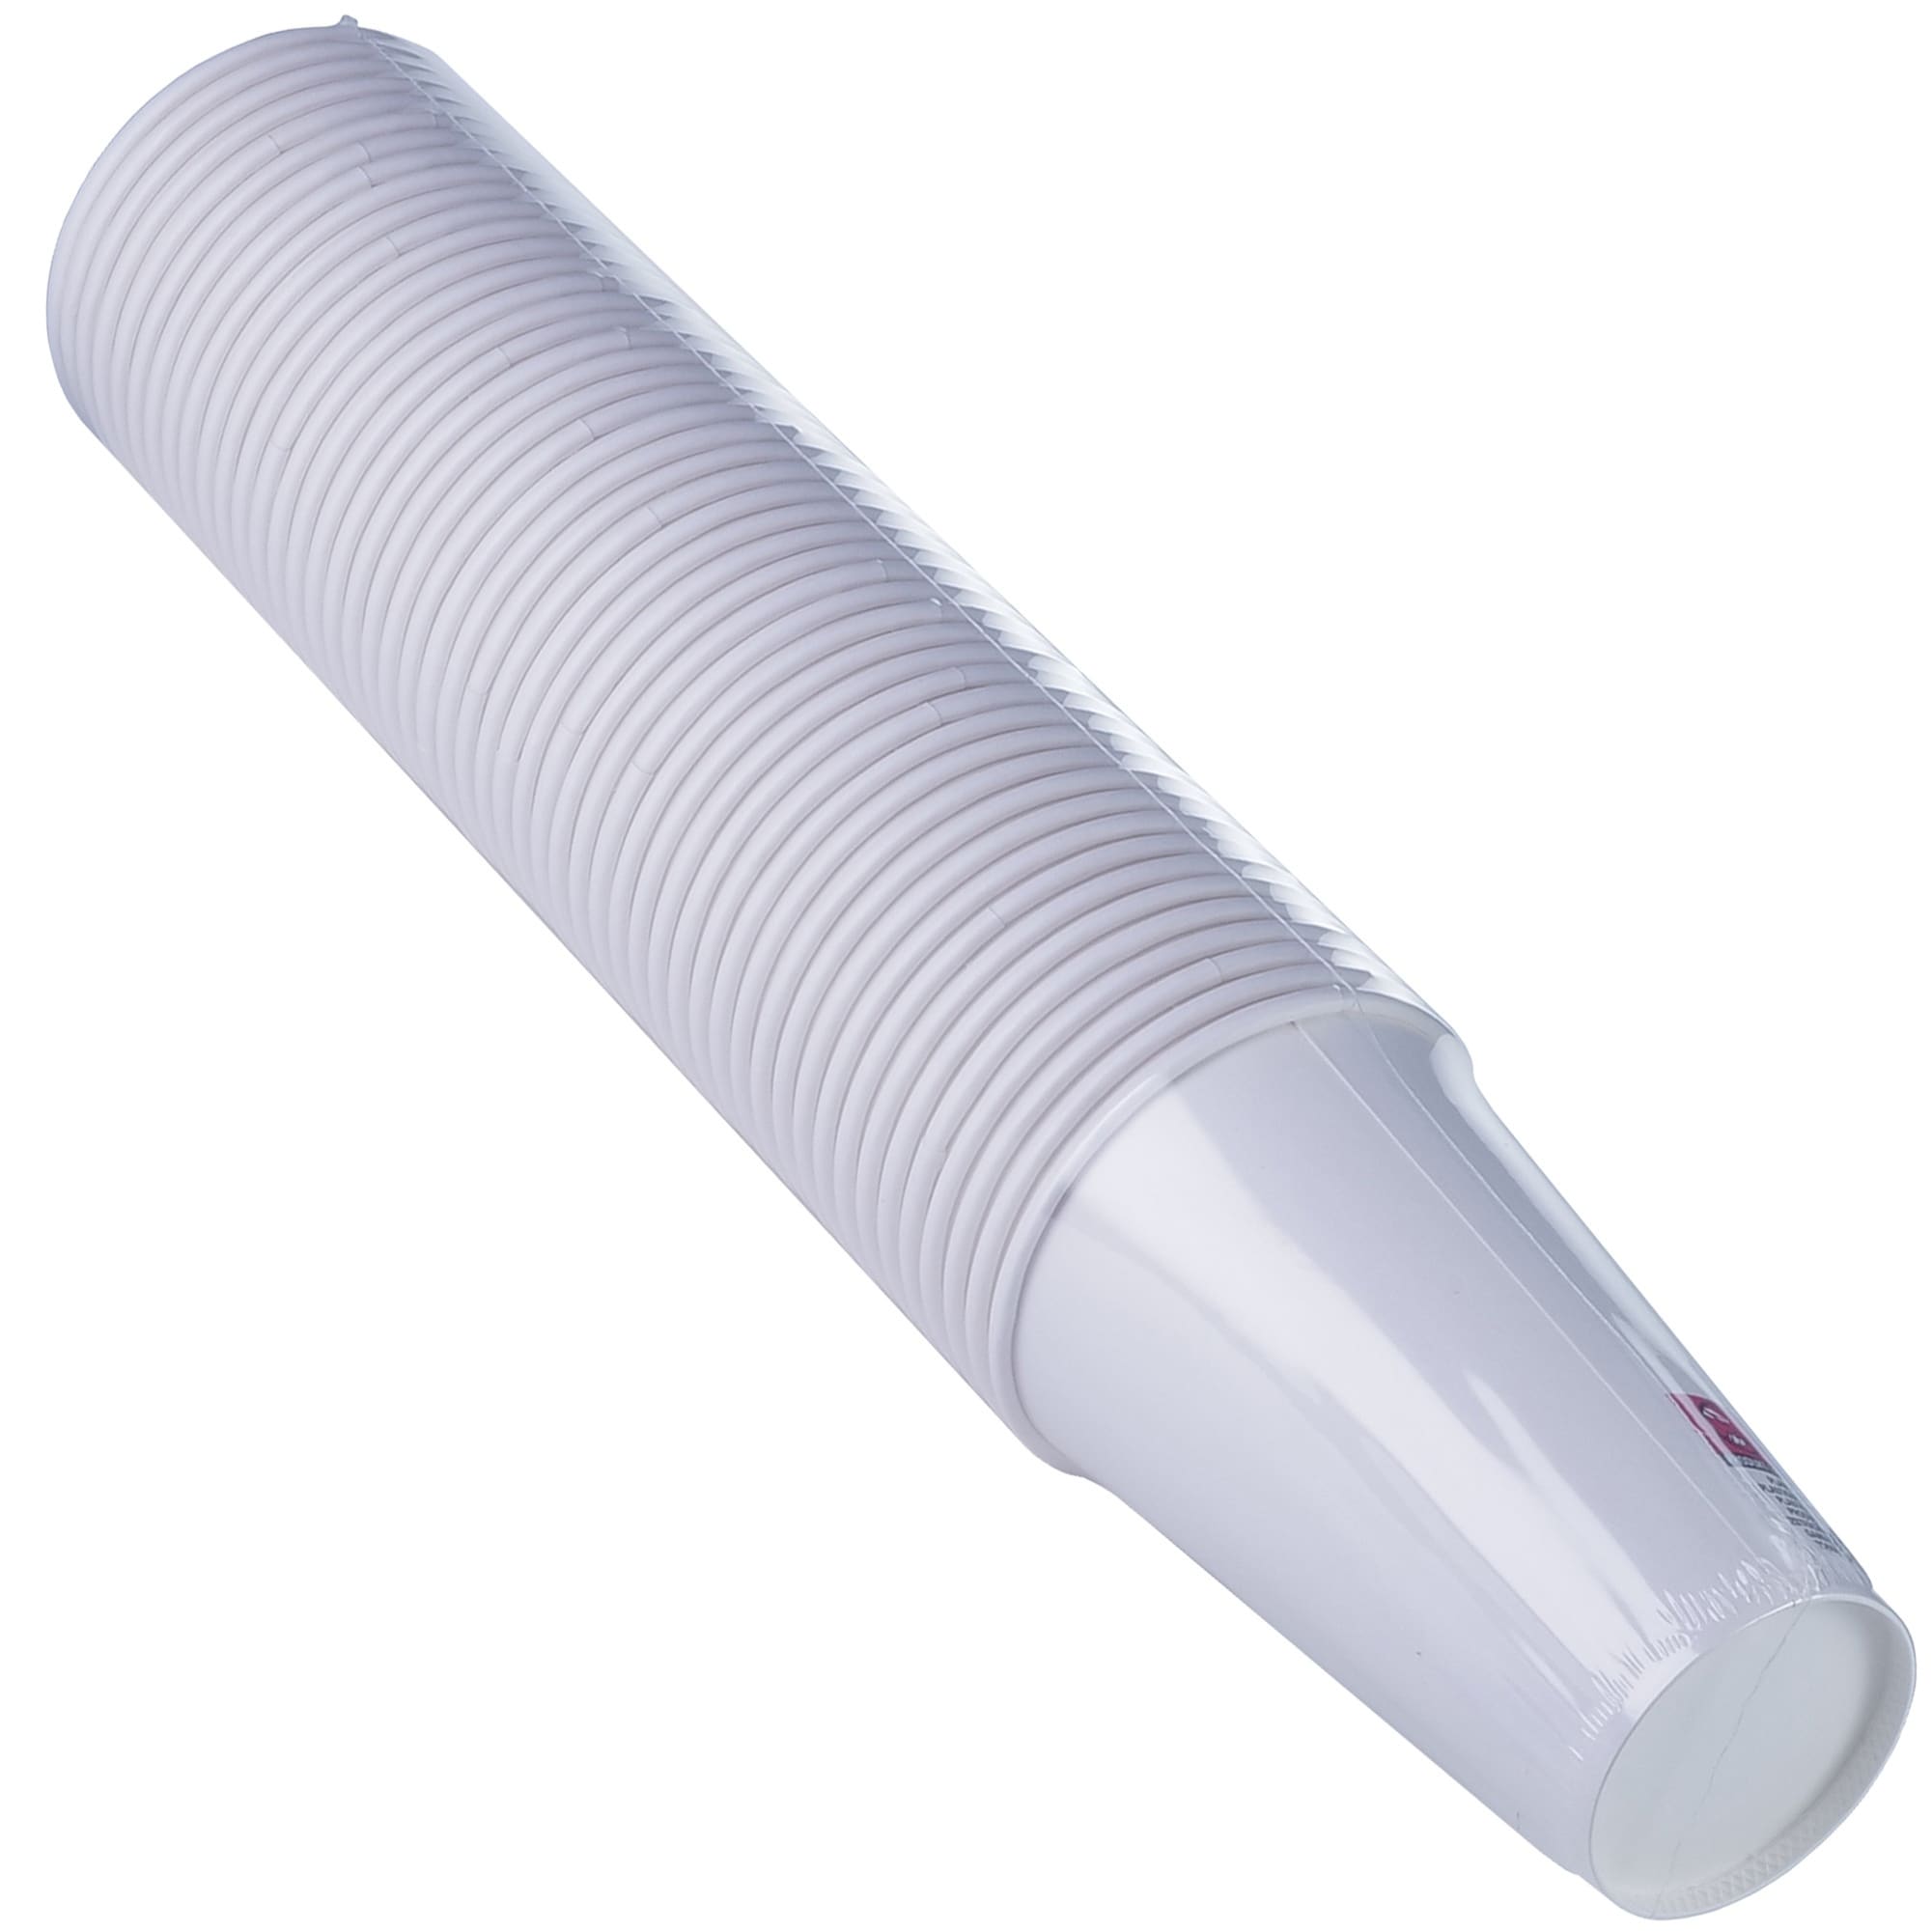 Disposable mixing cup 300 ml (paper), 50 pcs, image 2